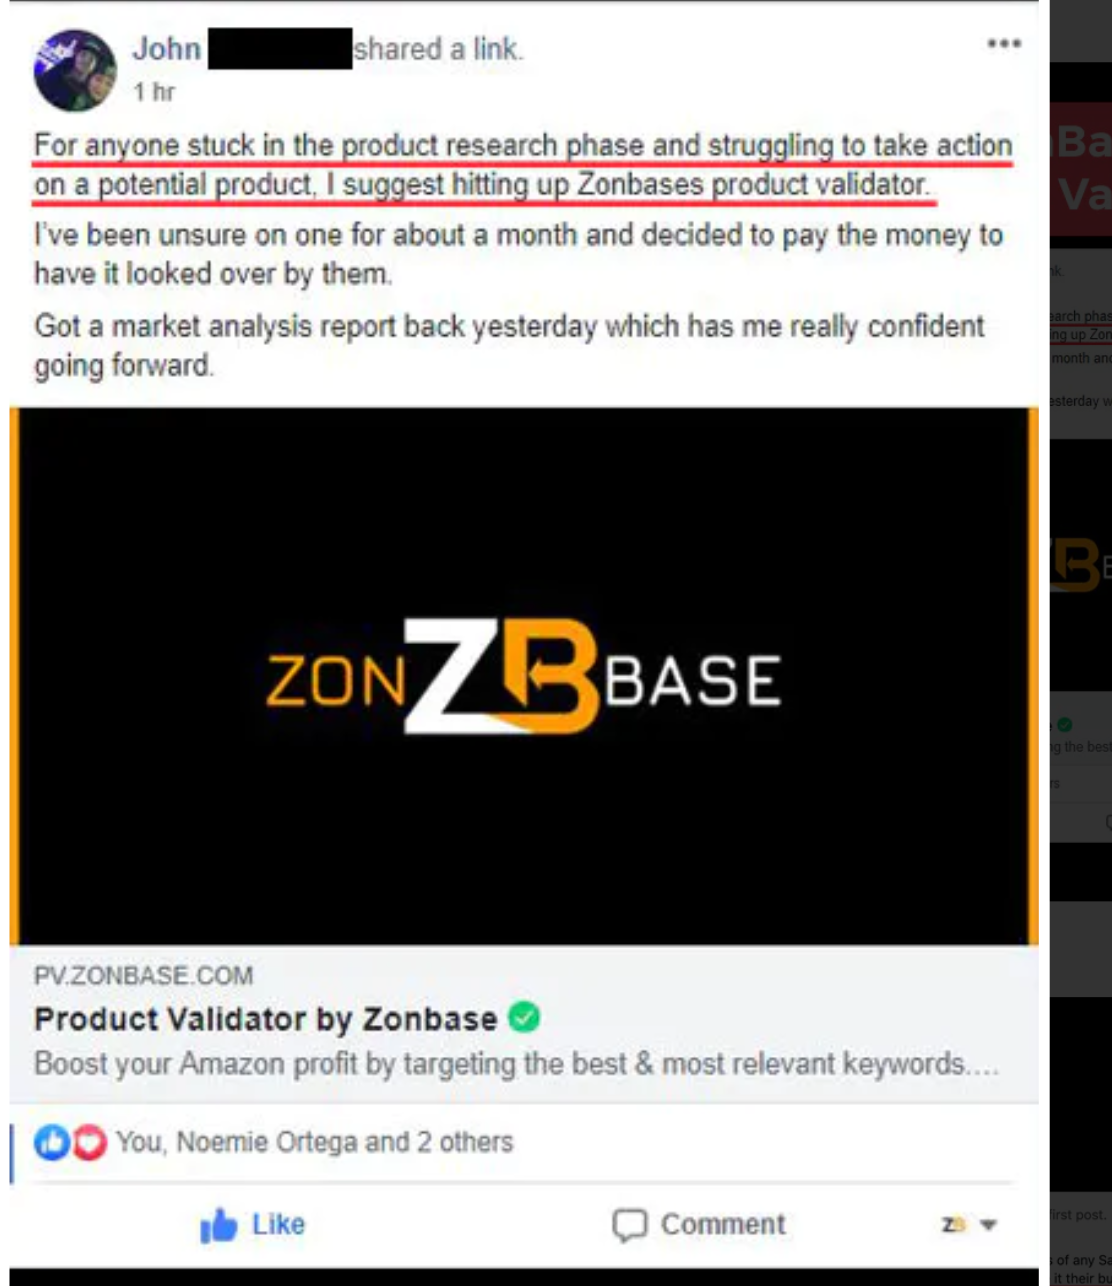 Zonbase products